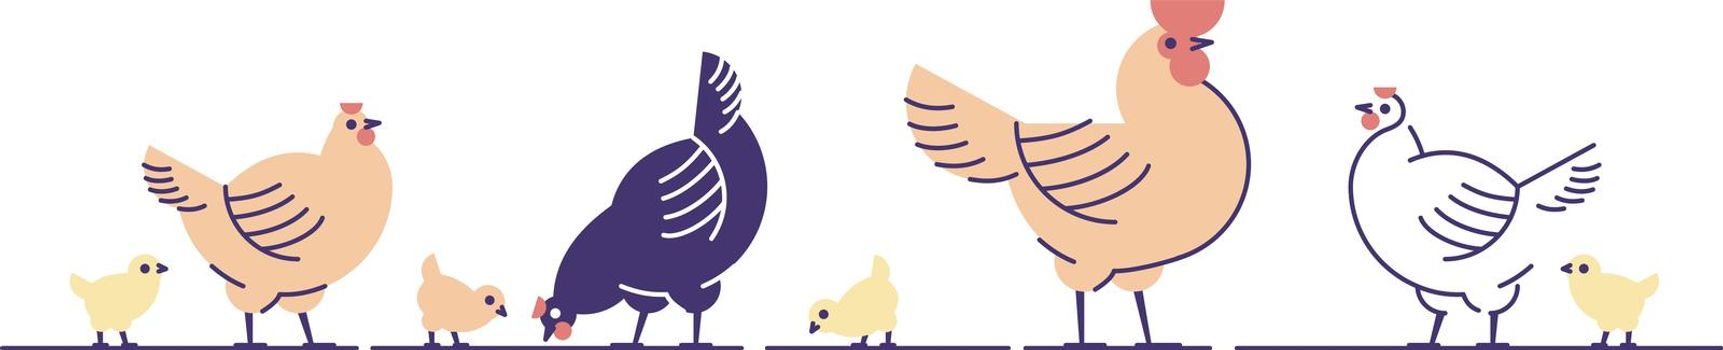 Chickens flat vector illustration. Multicolor chicks, hens and and rooster cartoon isolated design elements with outline. Chicken meat production, bird breeding. Poultry farm, animal husbandry